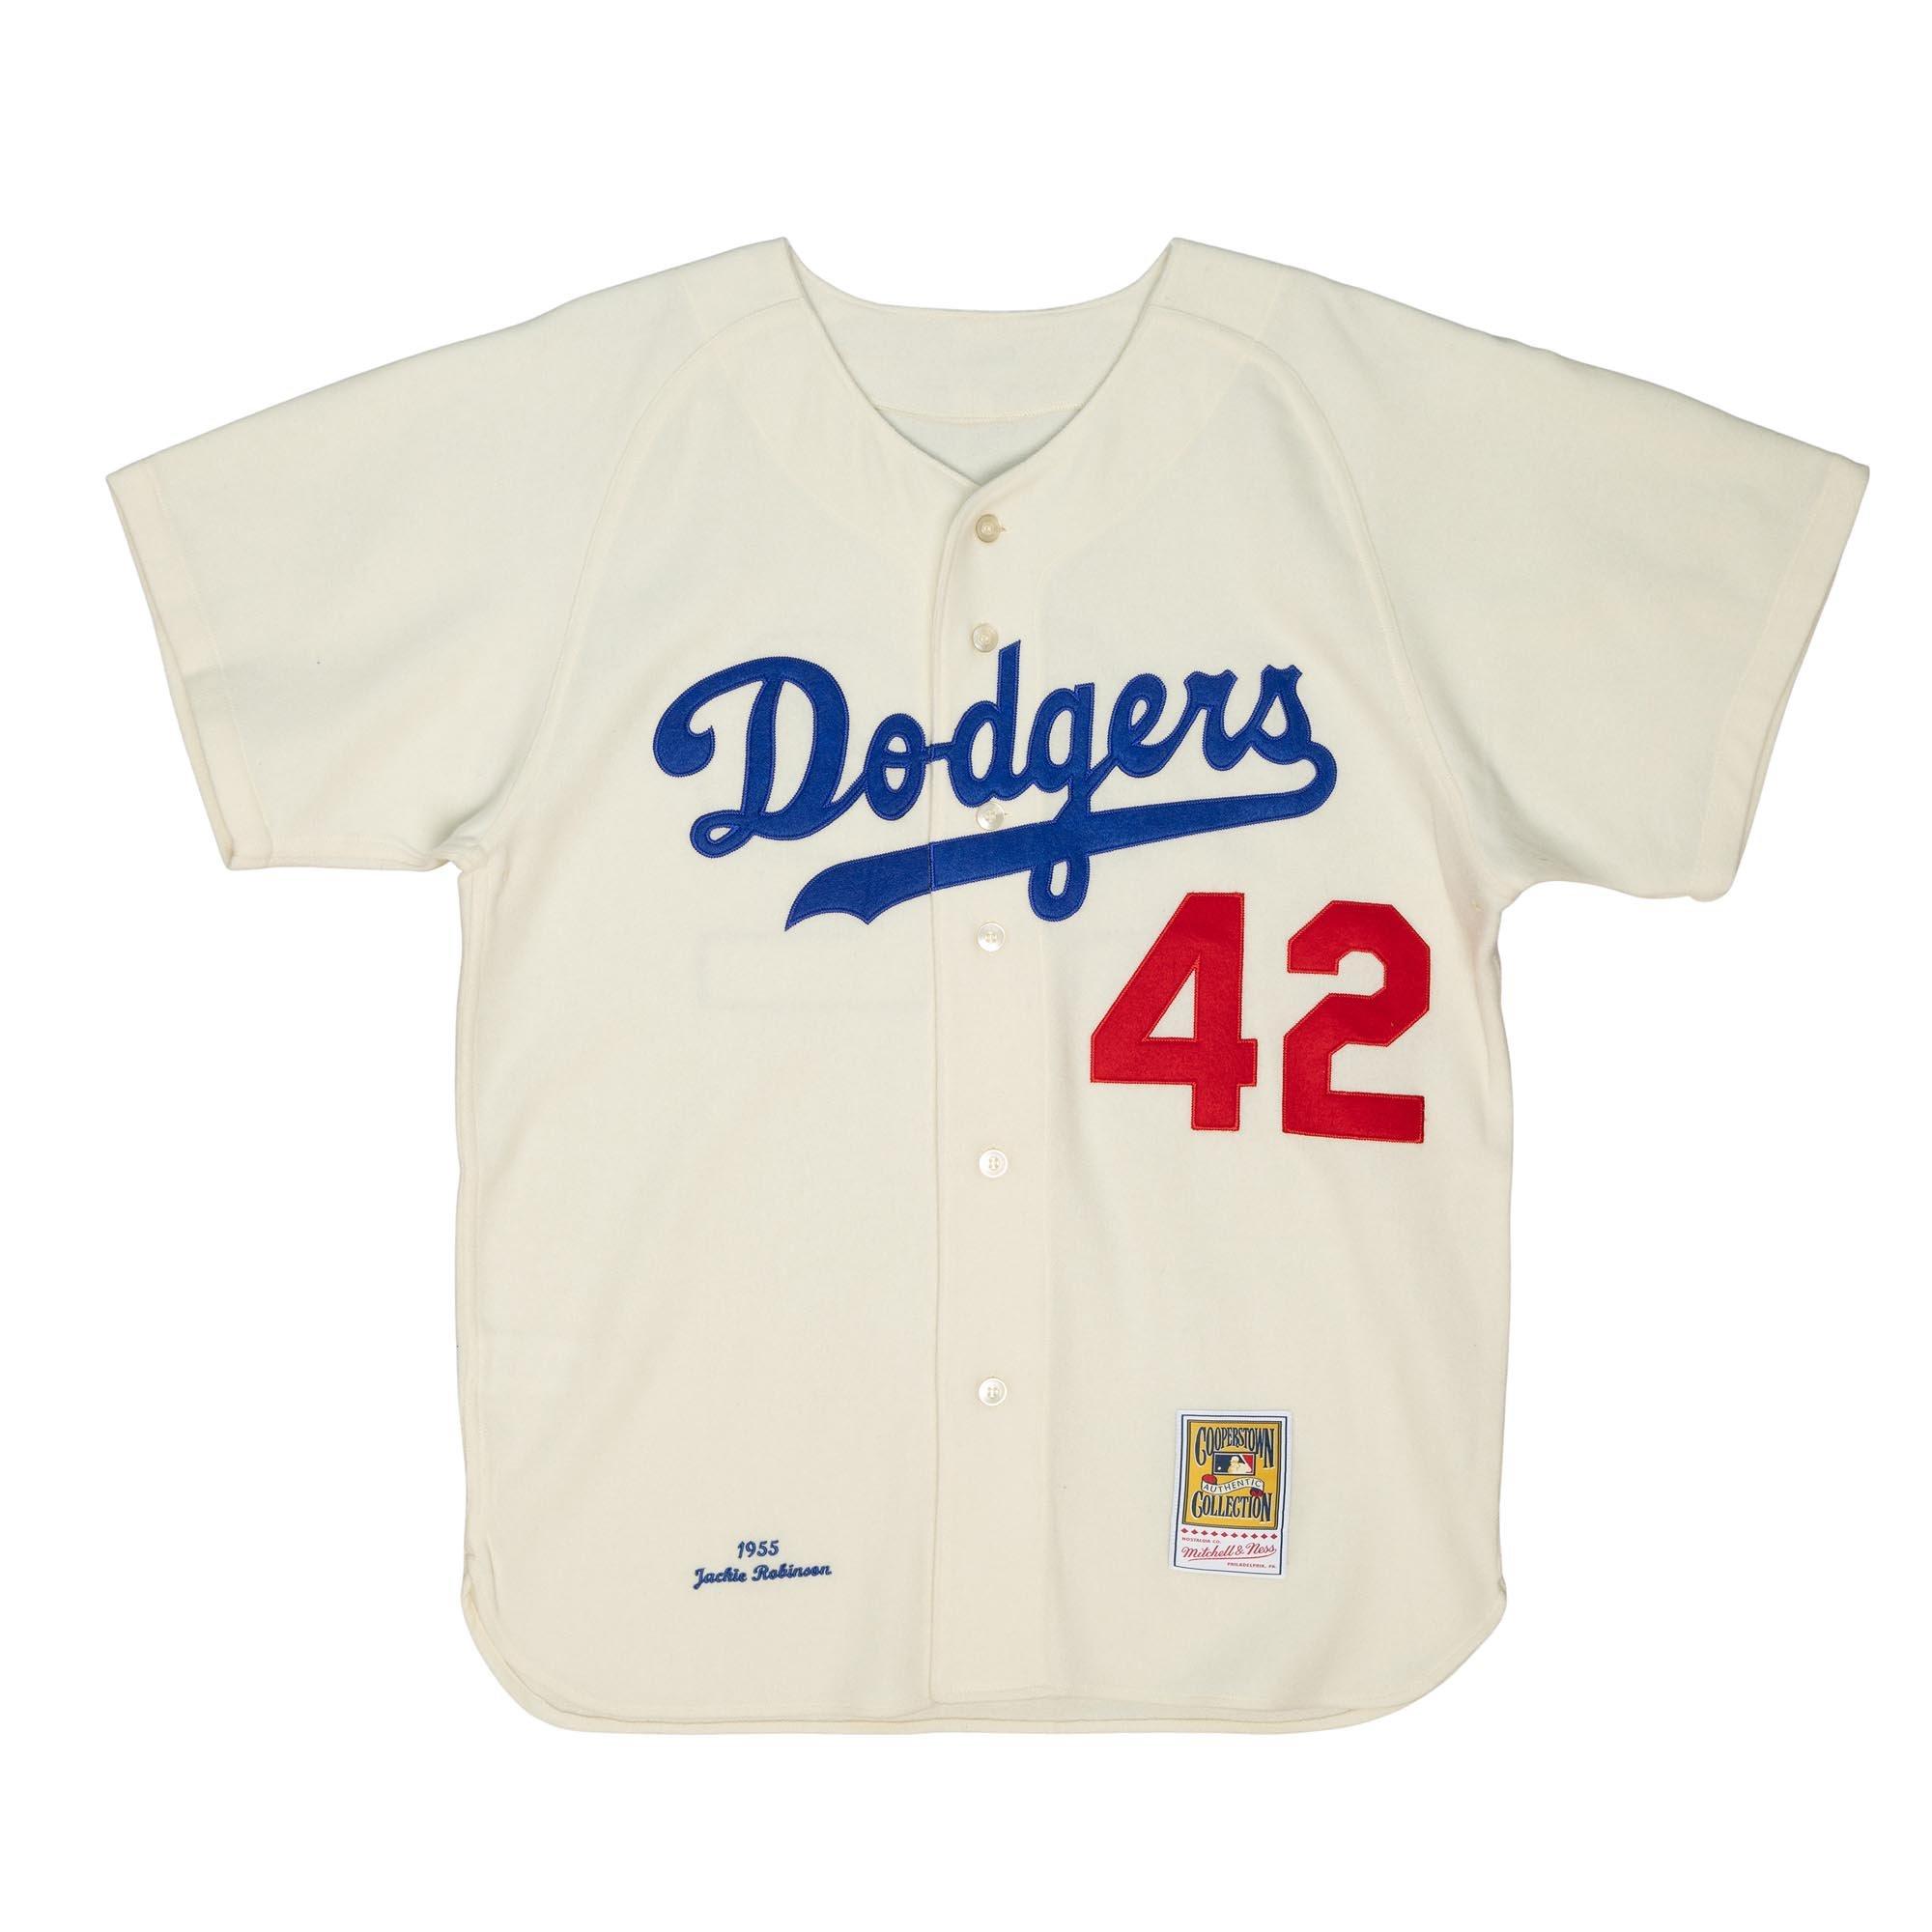 Mitchell & Ness Men's Brooklyn Dodgers Jackie Robinson Authentic Wool Jersey